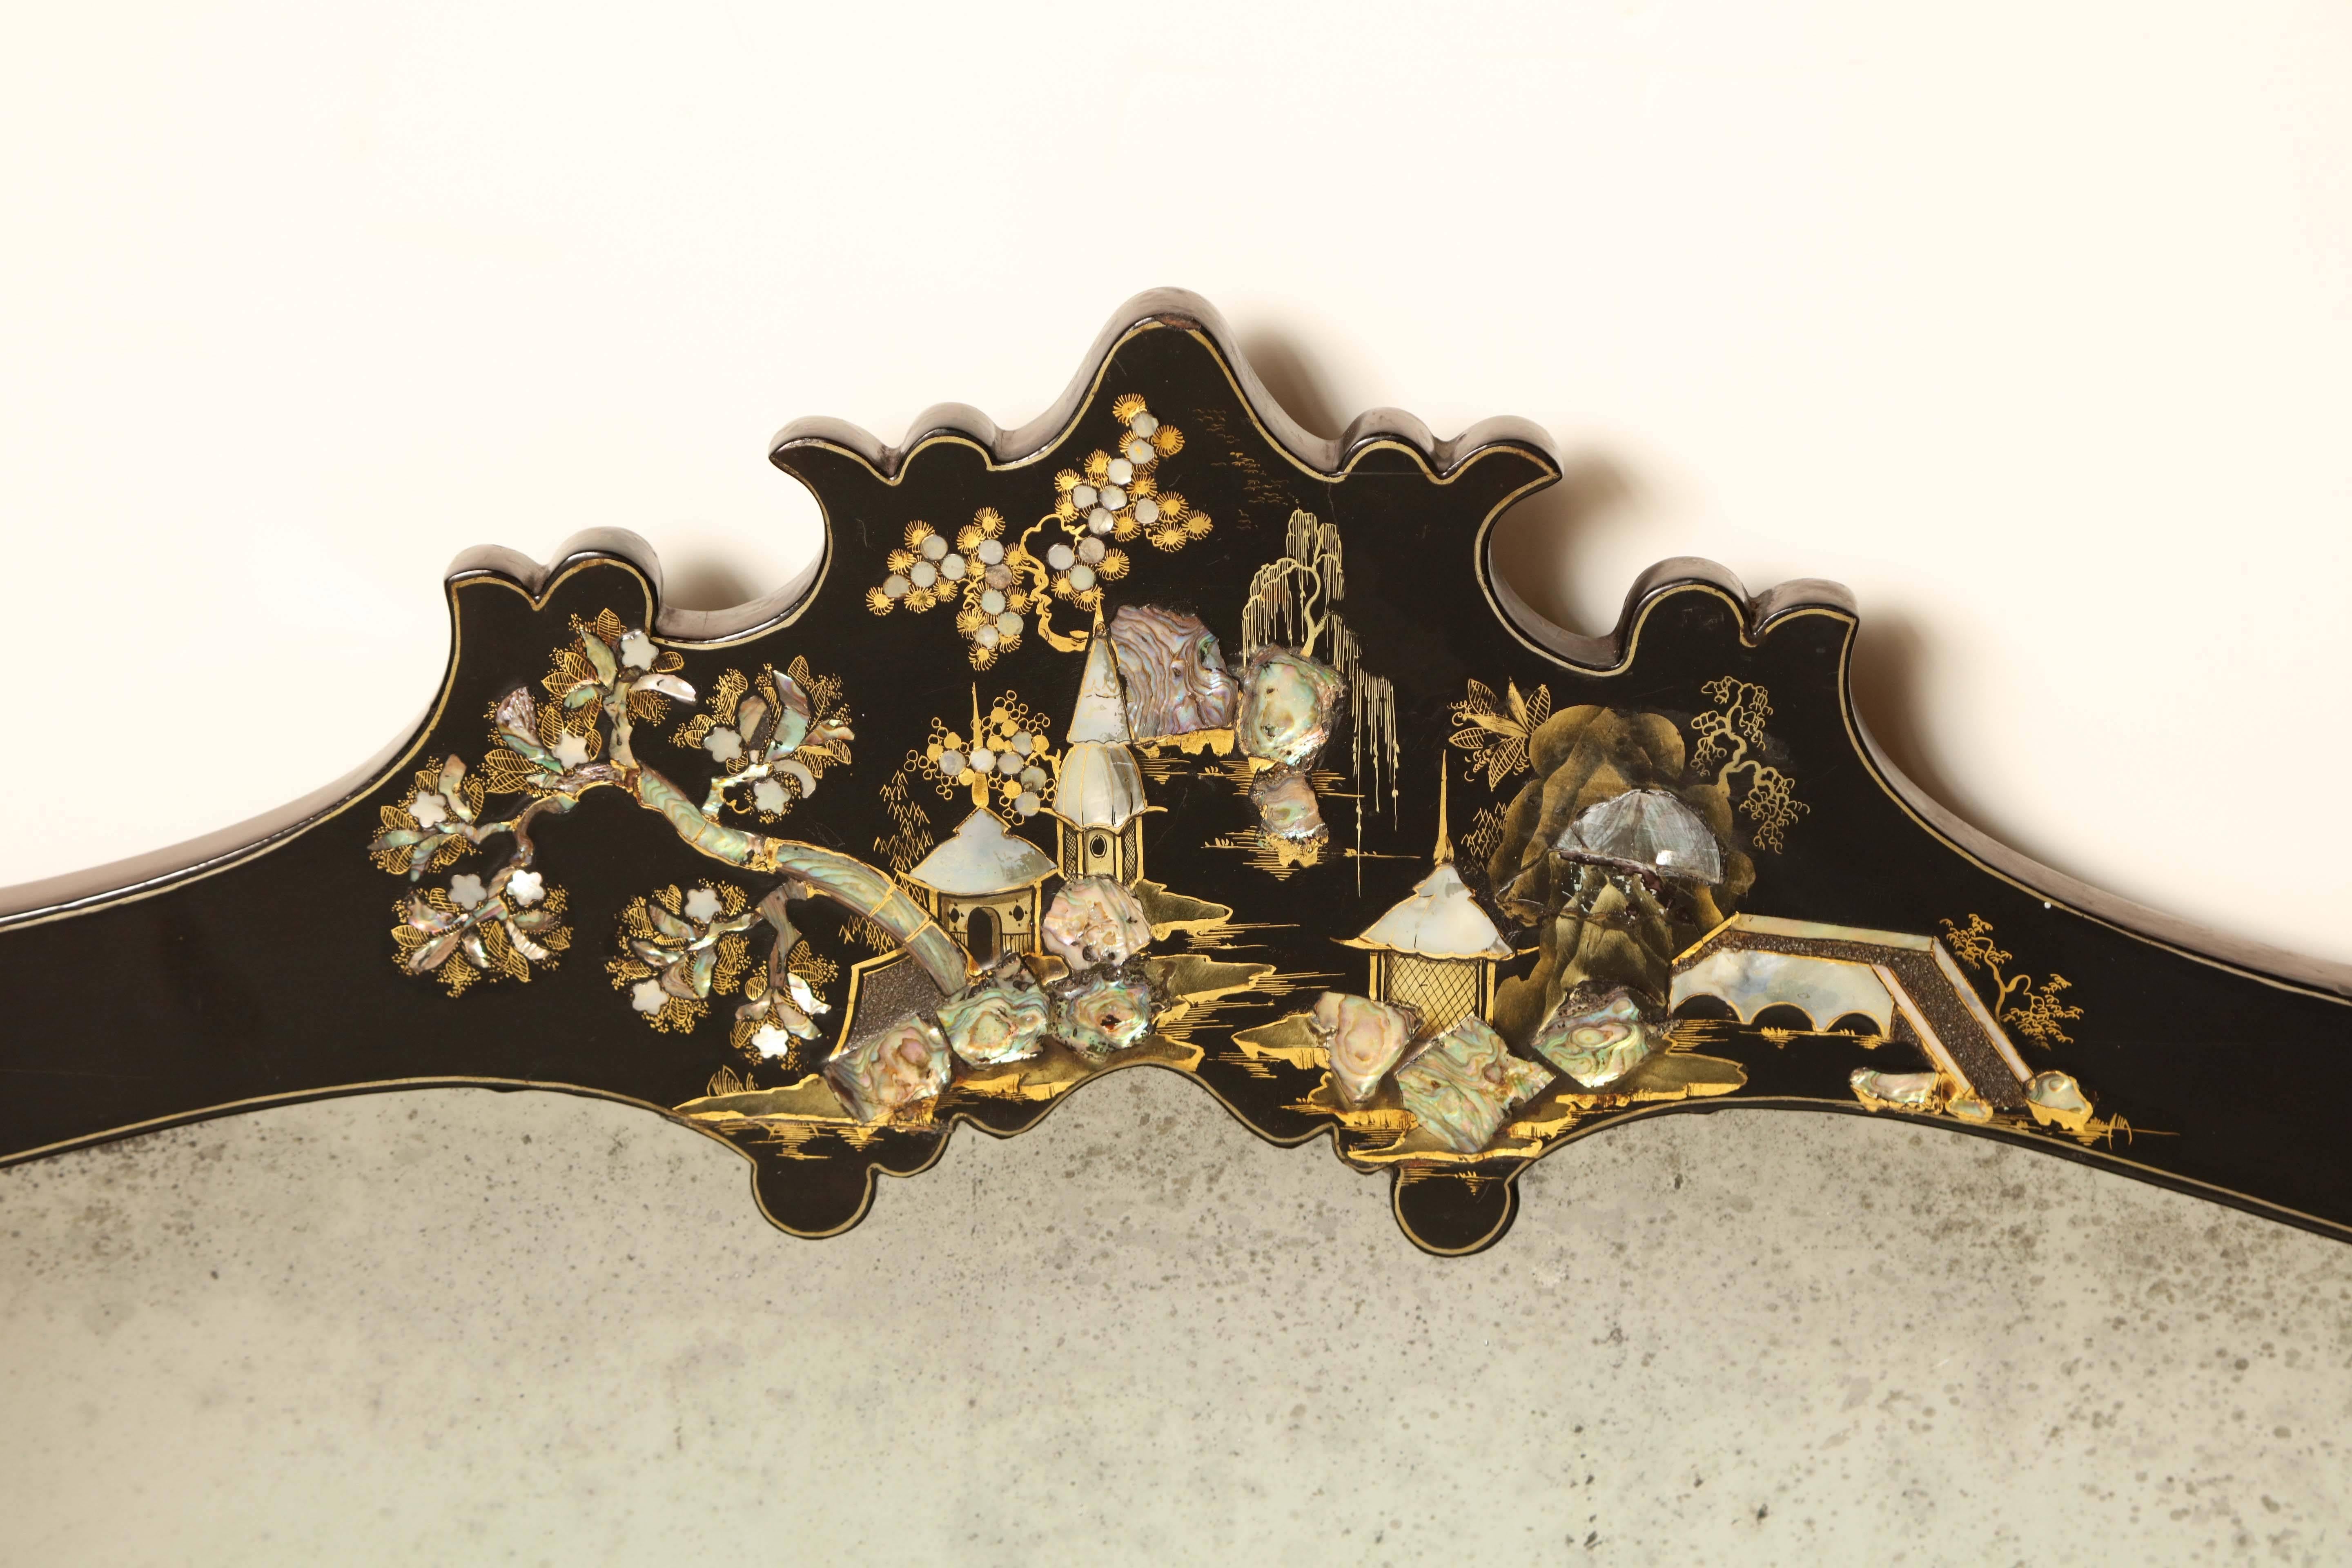 Mid-19th century Japanese lacquer and mother-of-pearl inlay overmantel mirror.